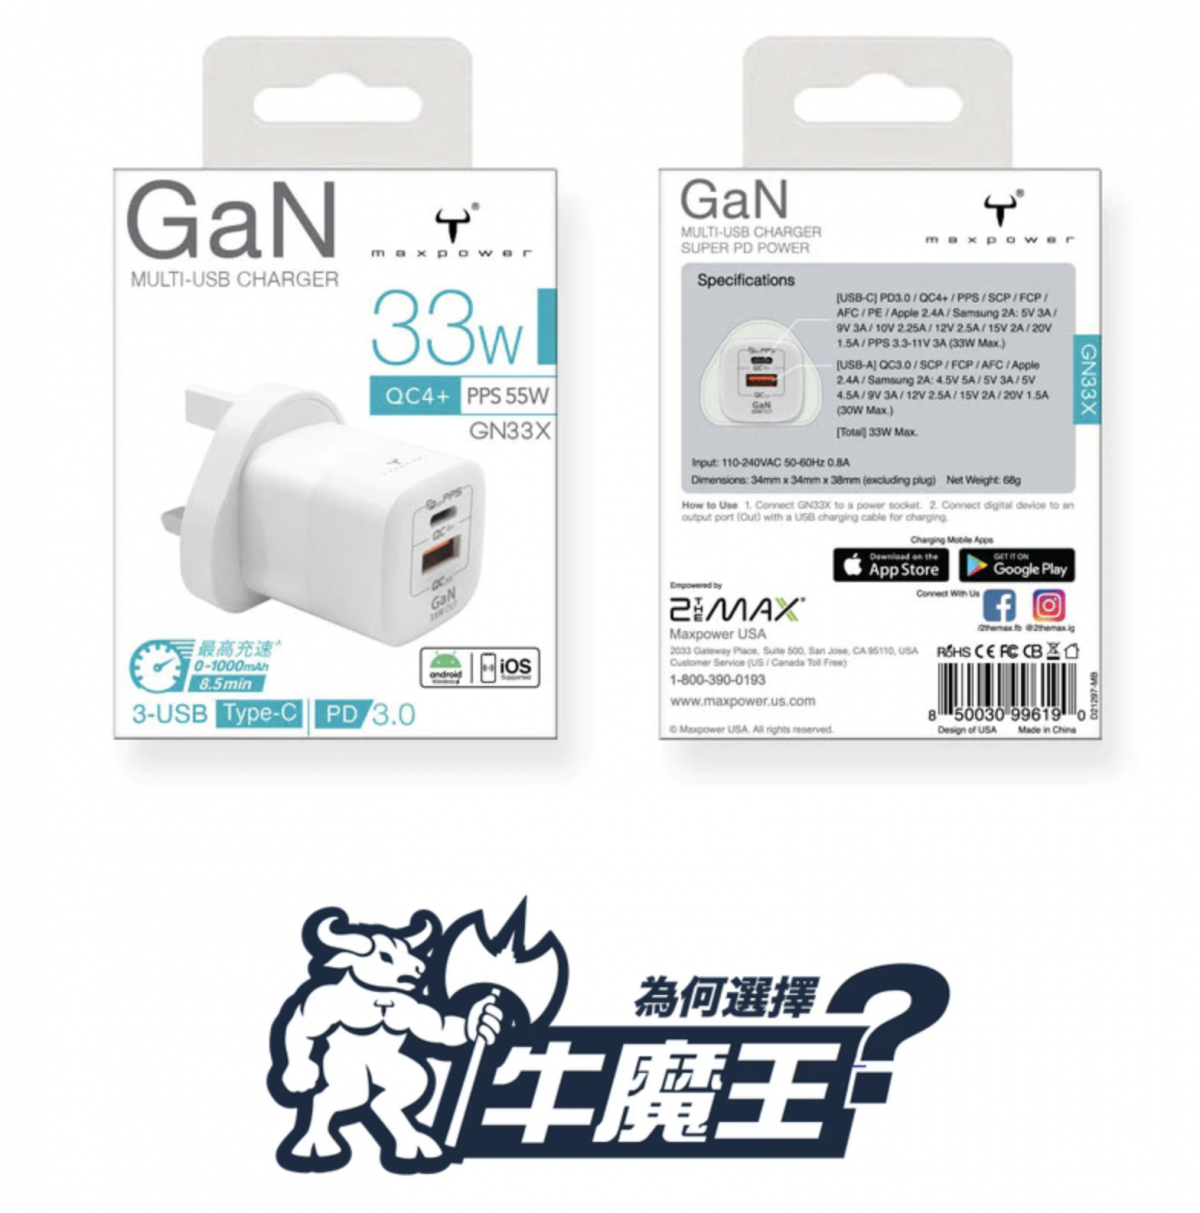 GN33X MULTI-USB CHARGER Type-C PD3.0